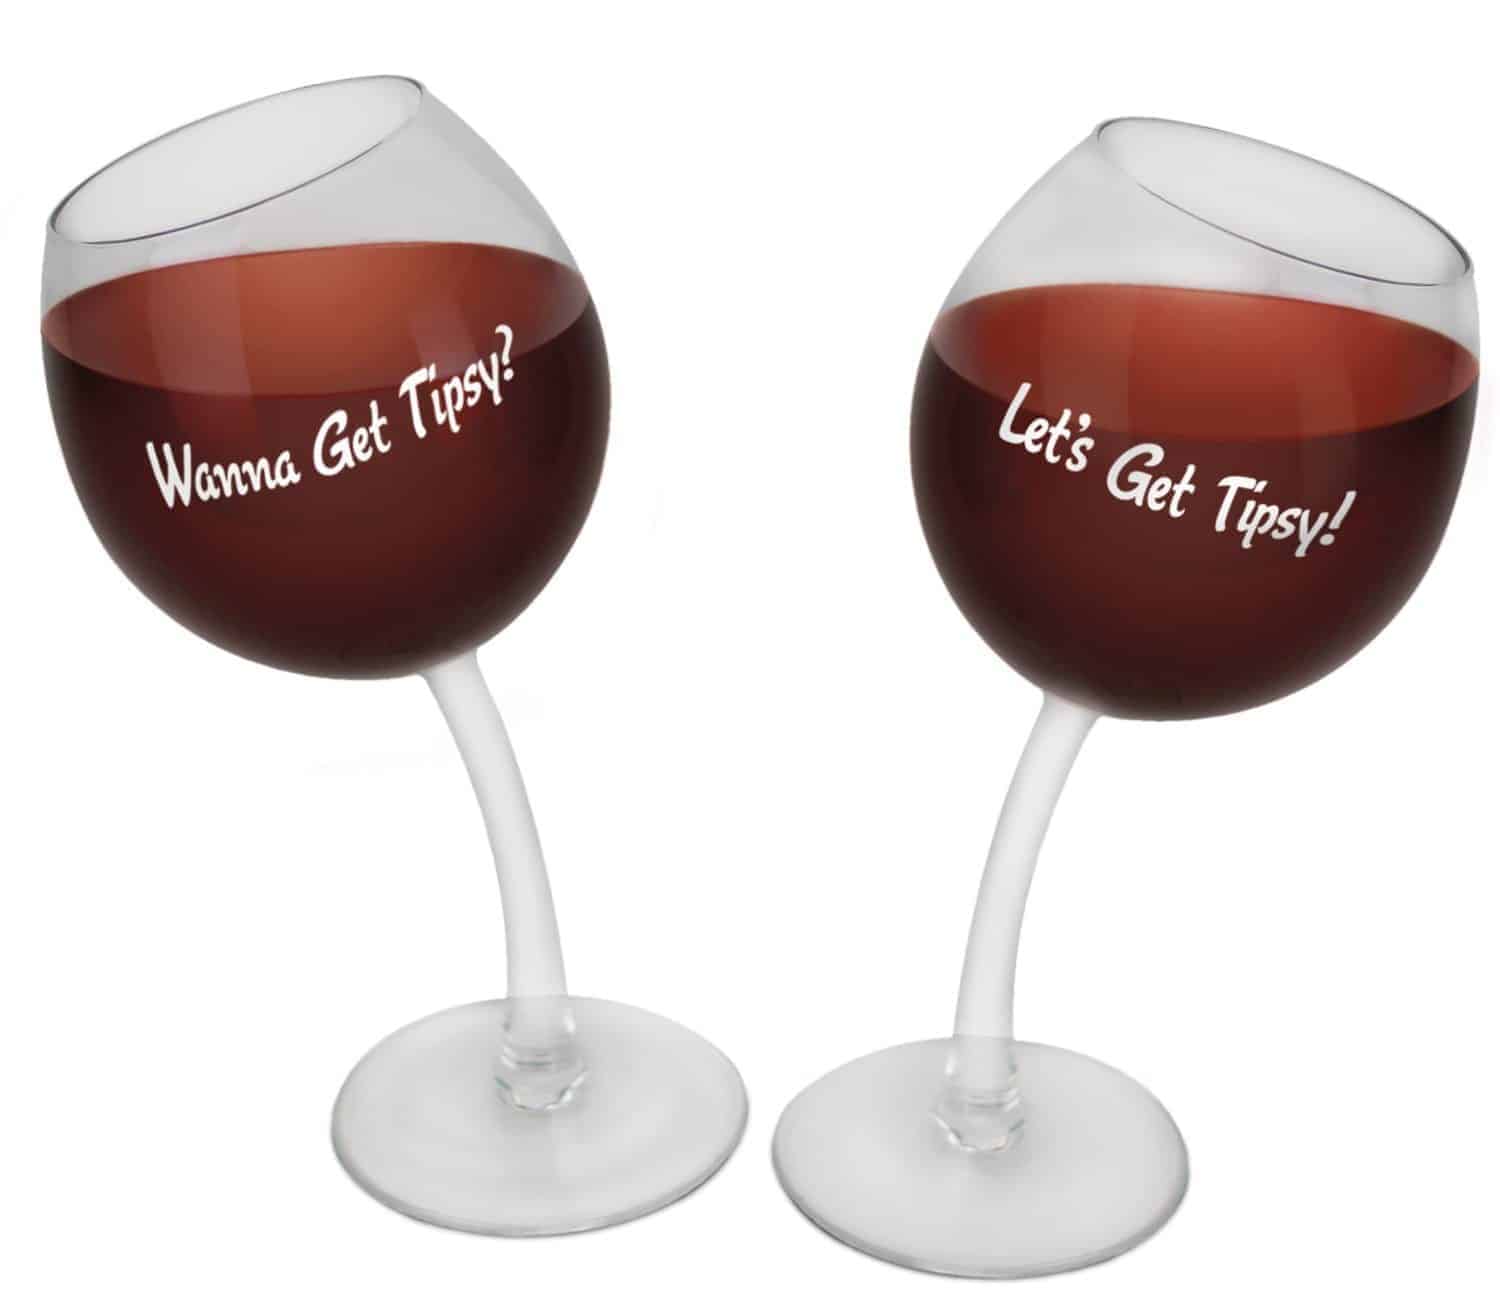 13 Funny Wine Glasses That Will Make You Smile!